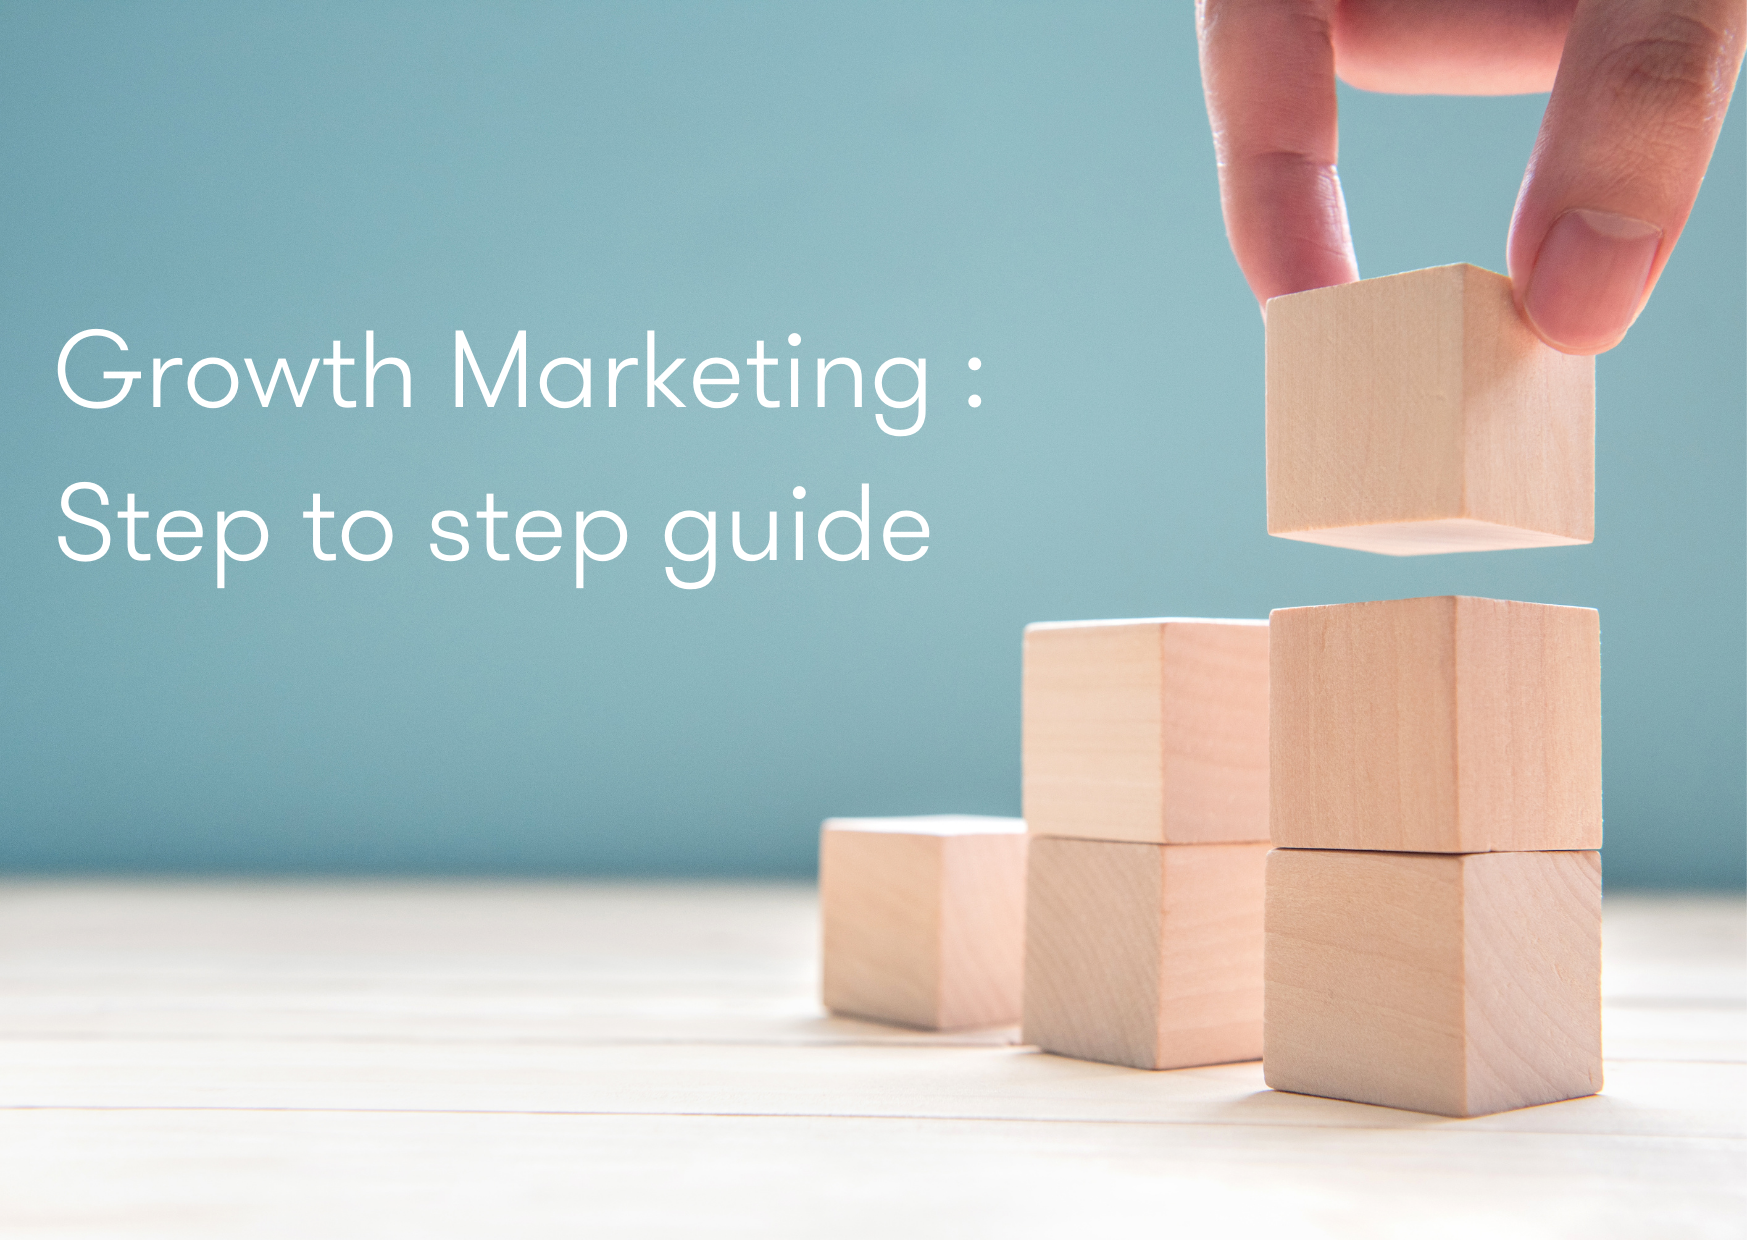 Growth Marketing : Step to Step guide